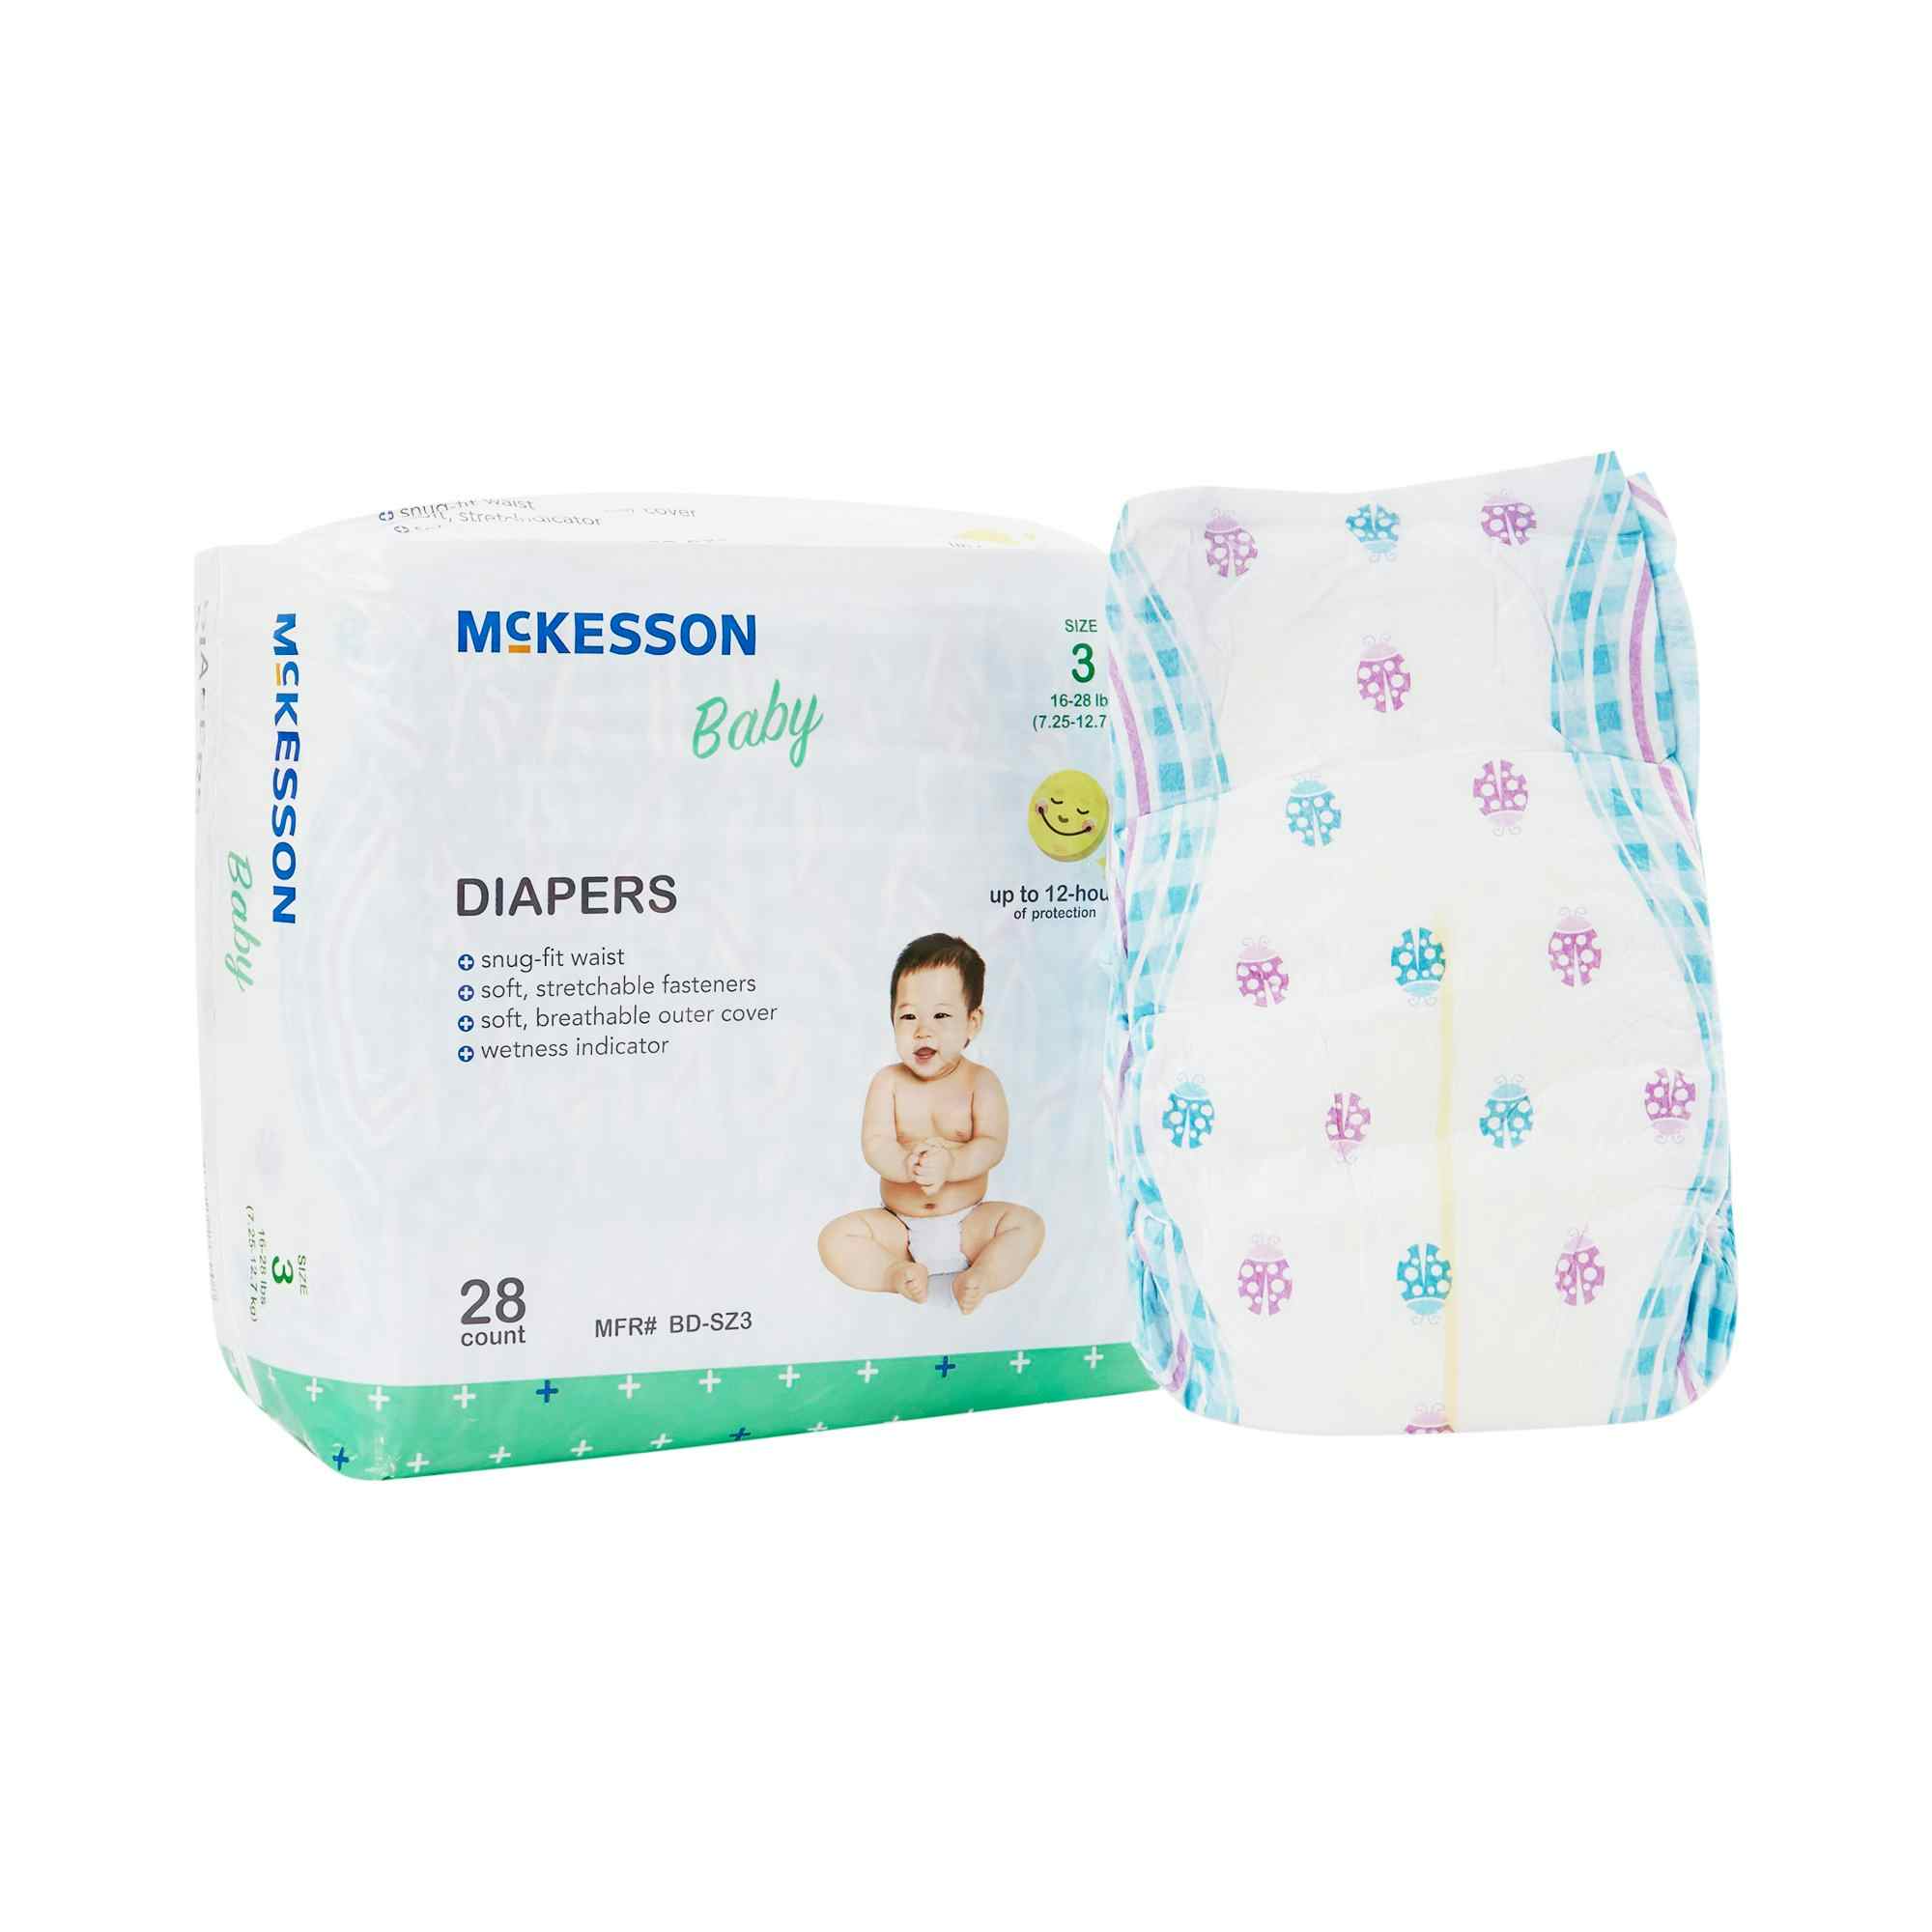 McKesson Disposable Unisex Baby Diaper with Tabs, Moderate, BD-SZ3, Size 3 16-28 lbs - Bag of 28